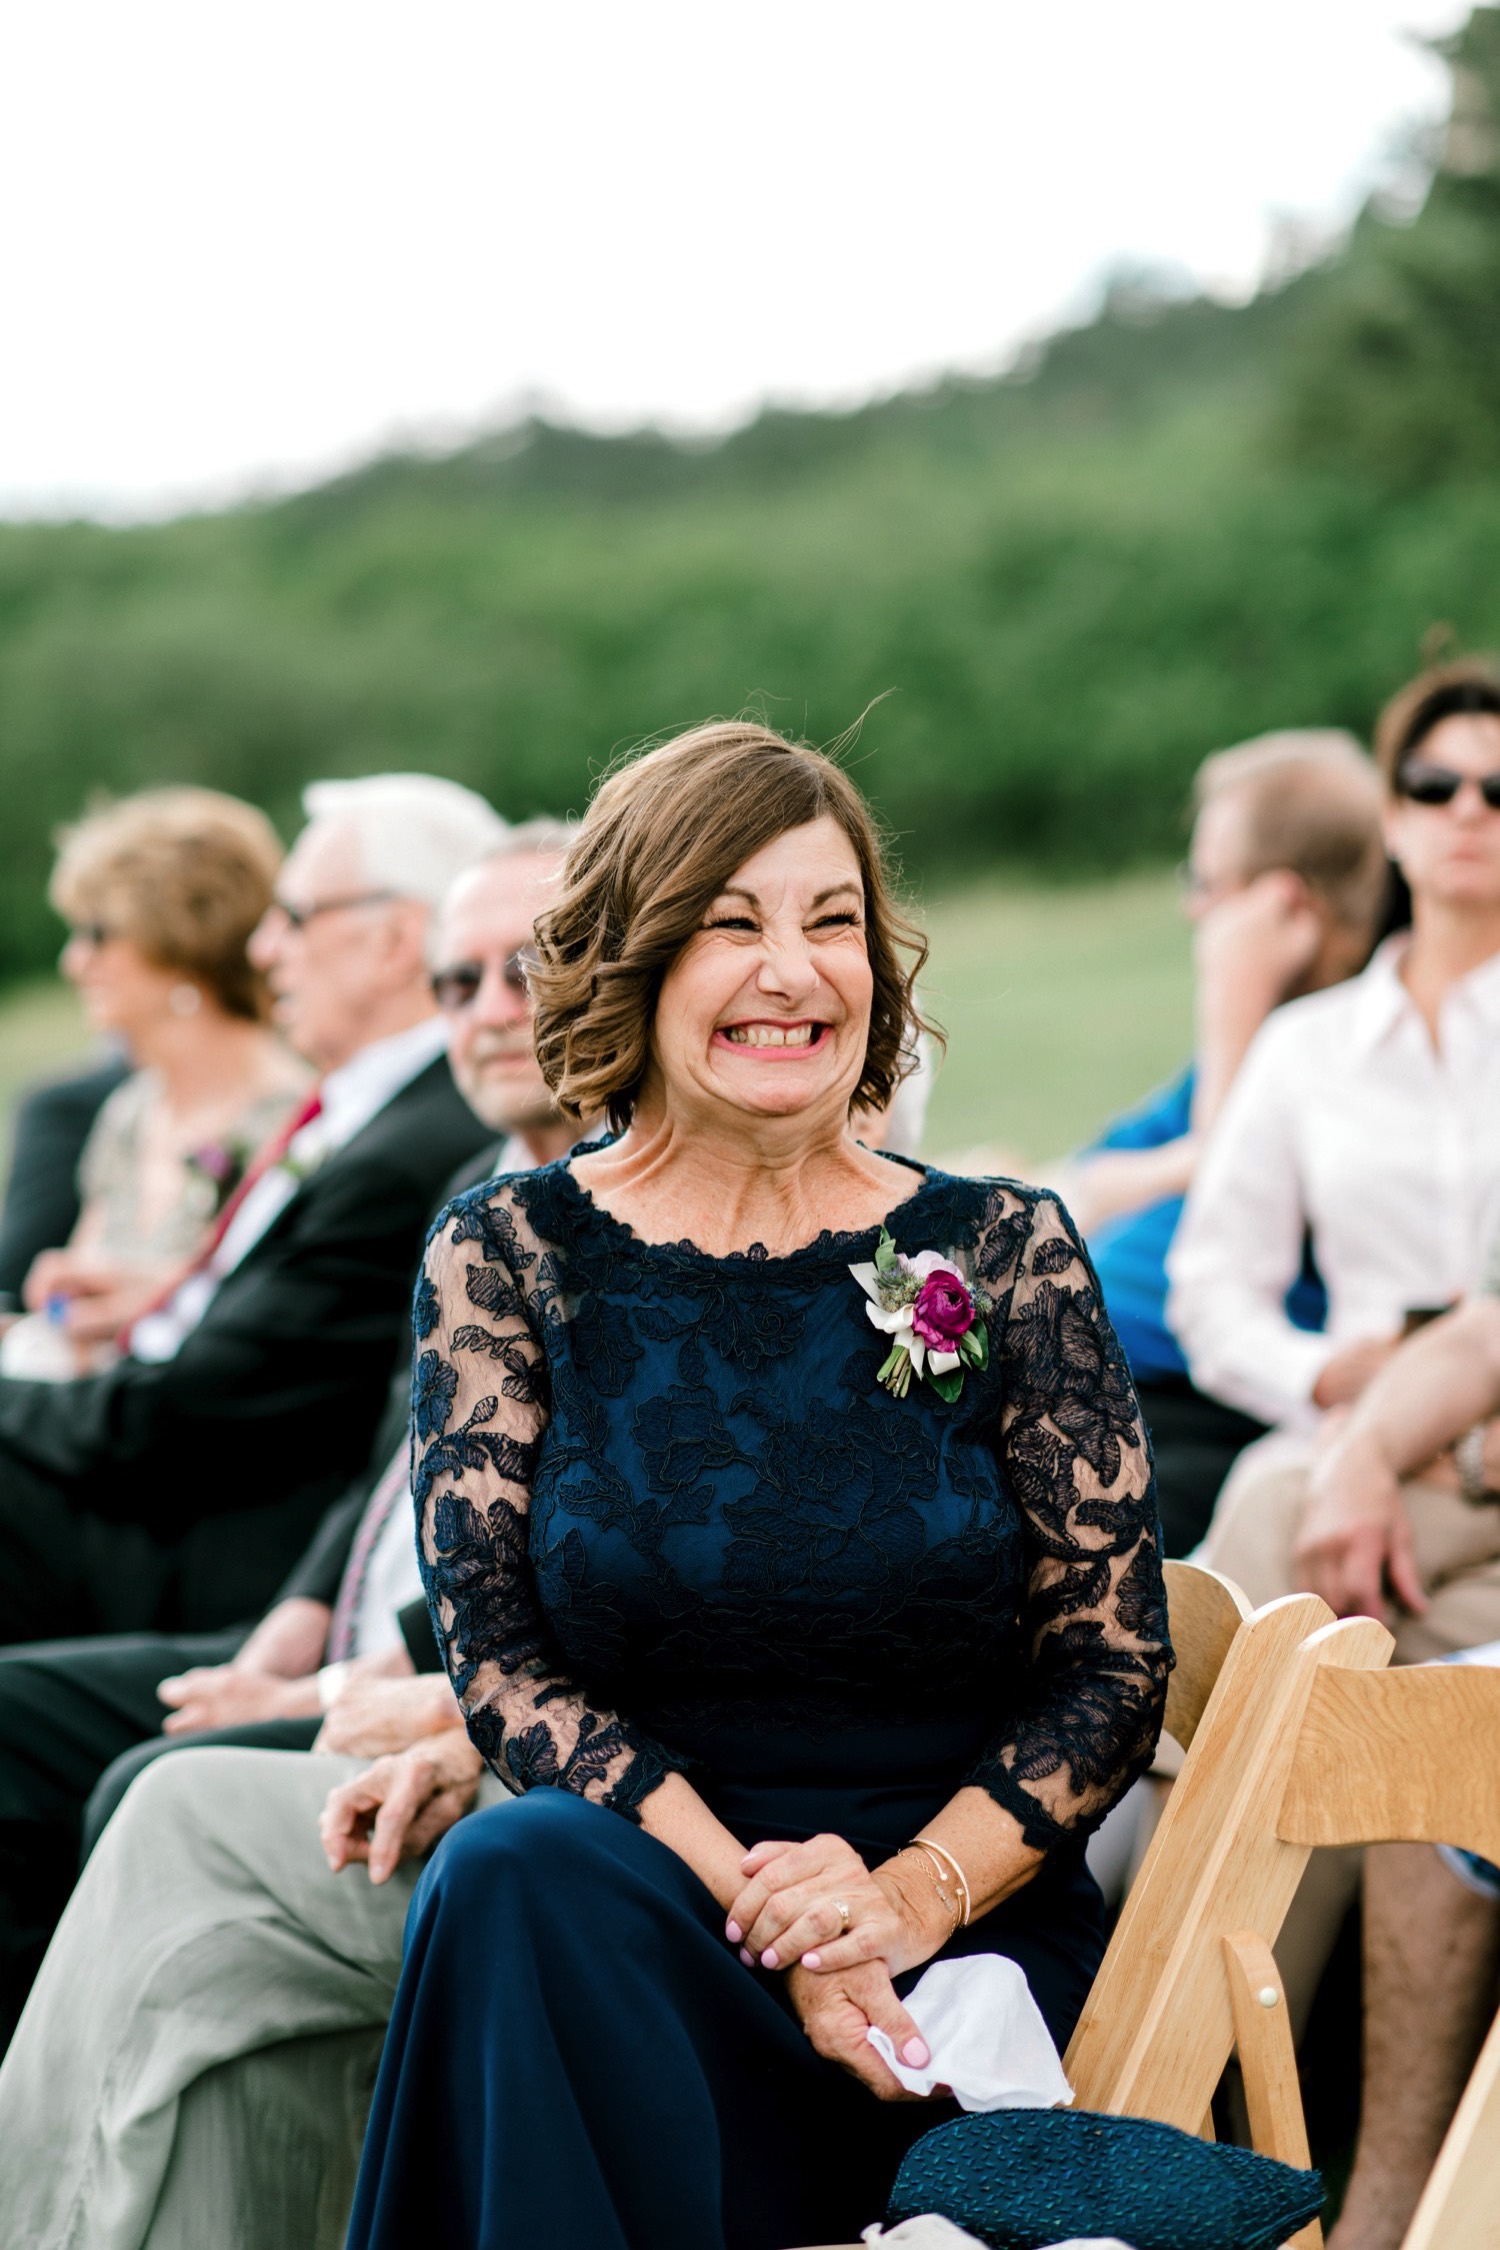 Guests, including the brides mother, were very excited for Kristen and Charlton's ceremony at Spruce Mountain Ranch in Larkspur, Colorado.